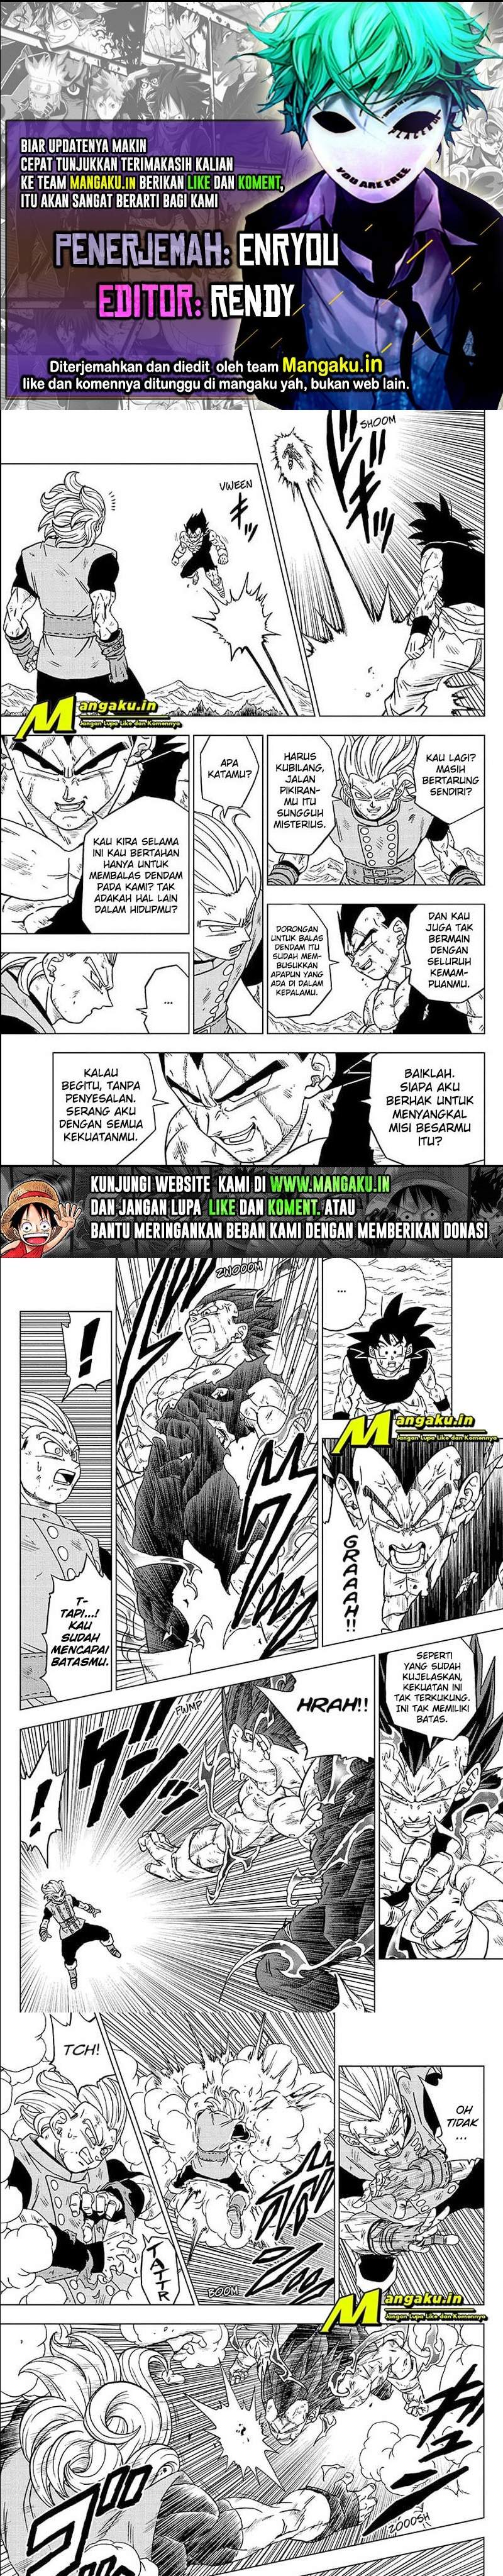 Dragon Ball Super: Chapter 76.2 - Page 1